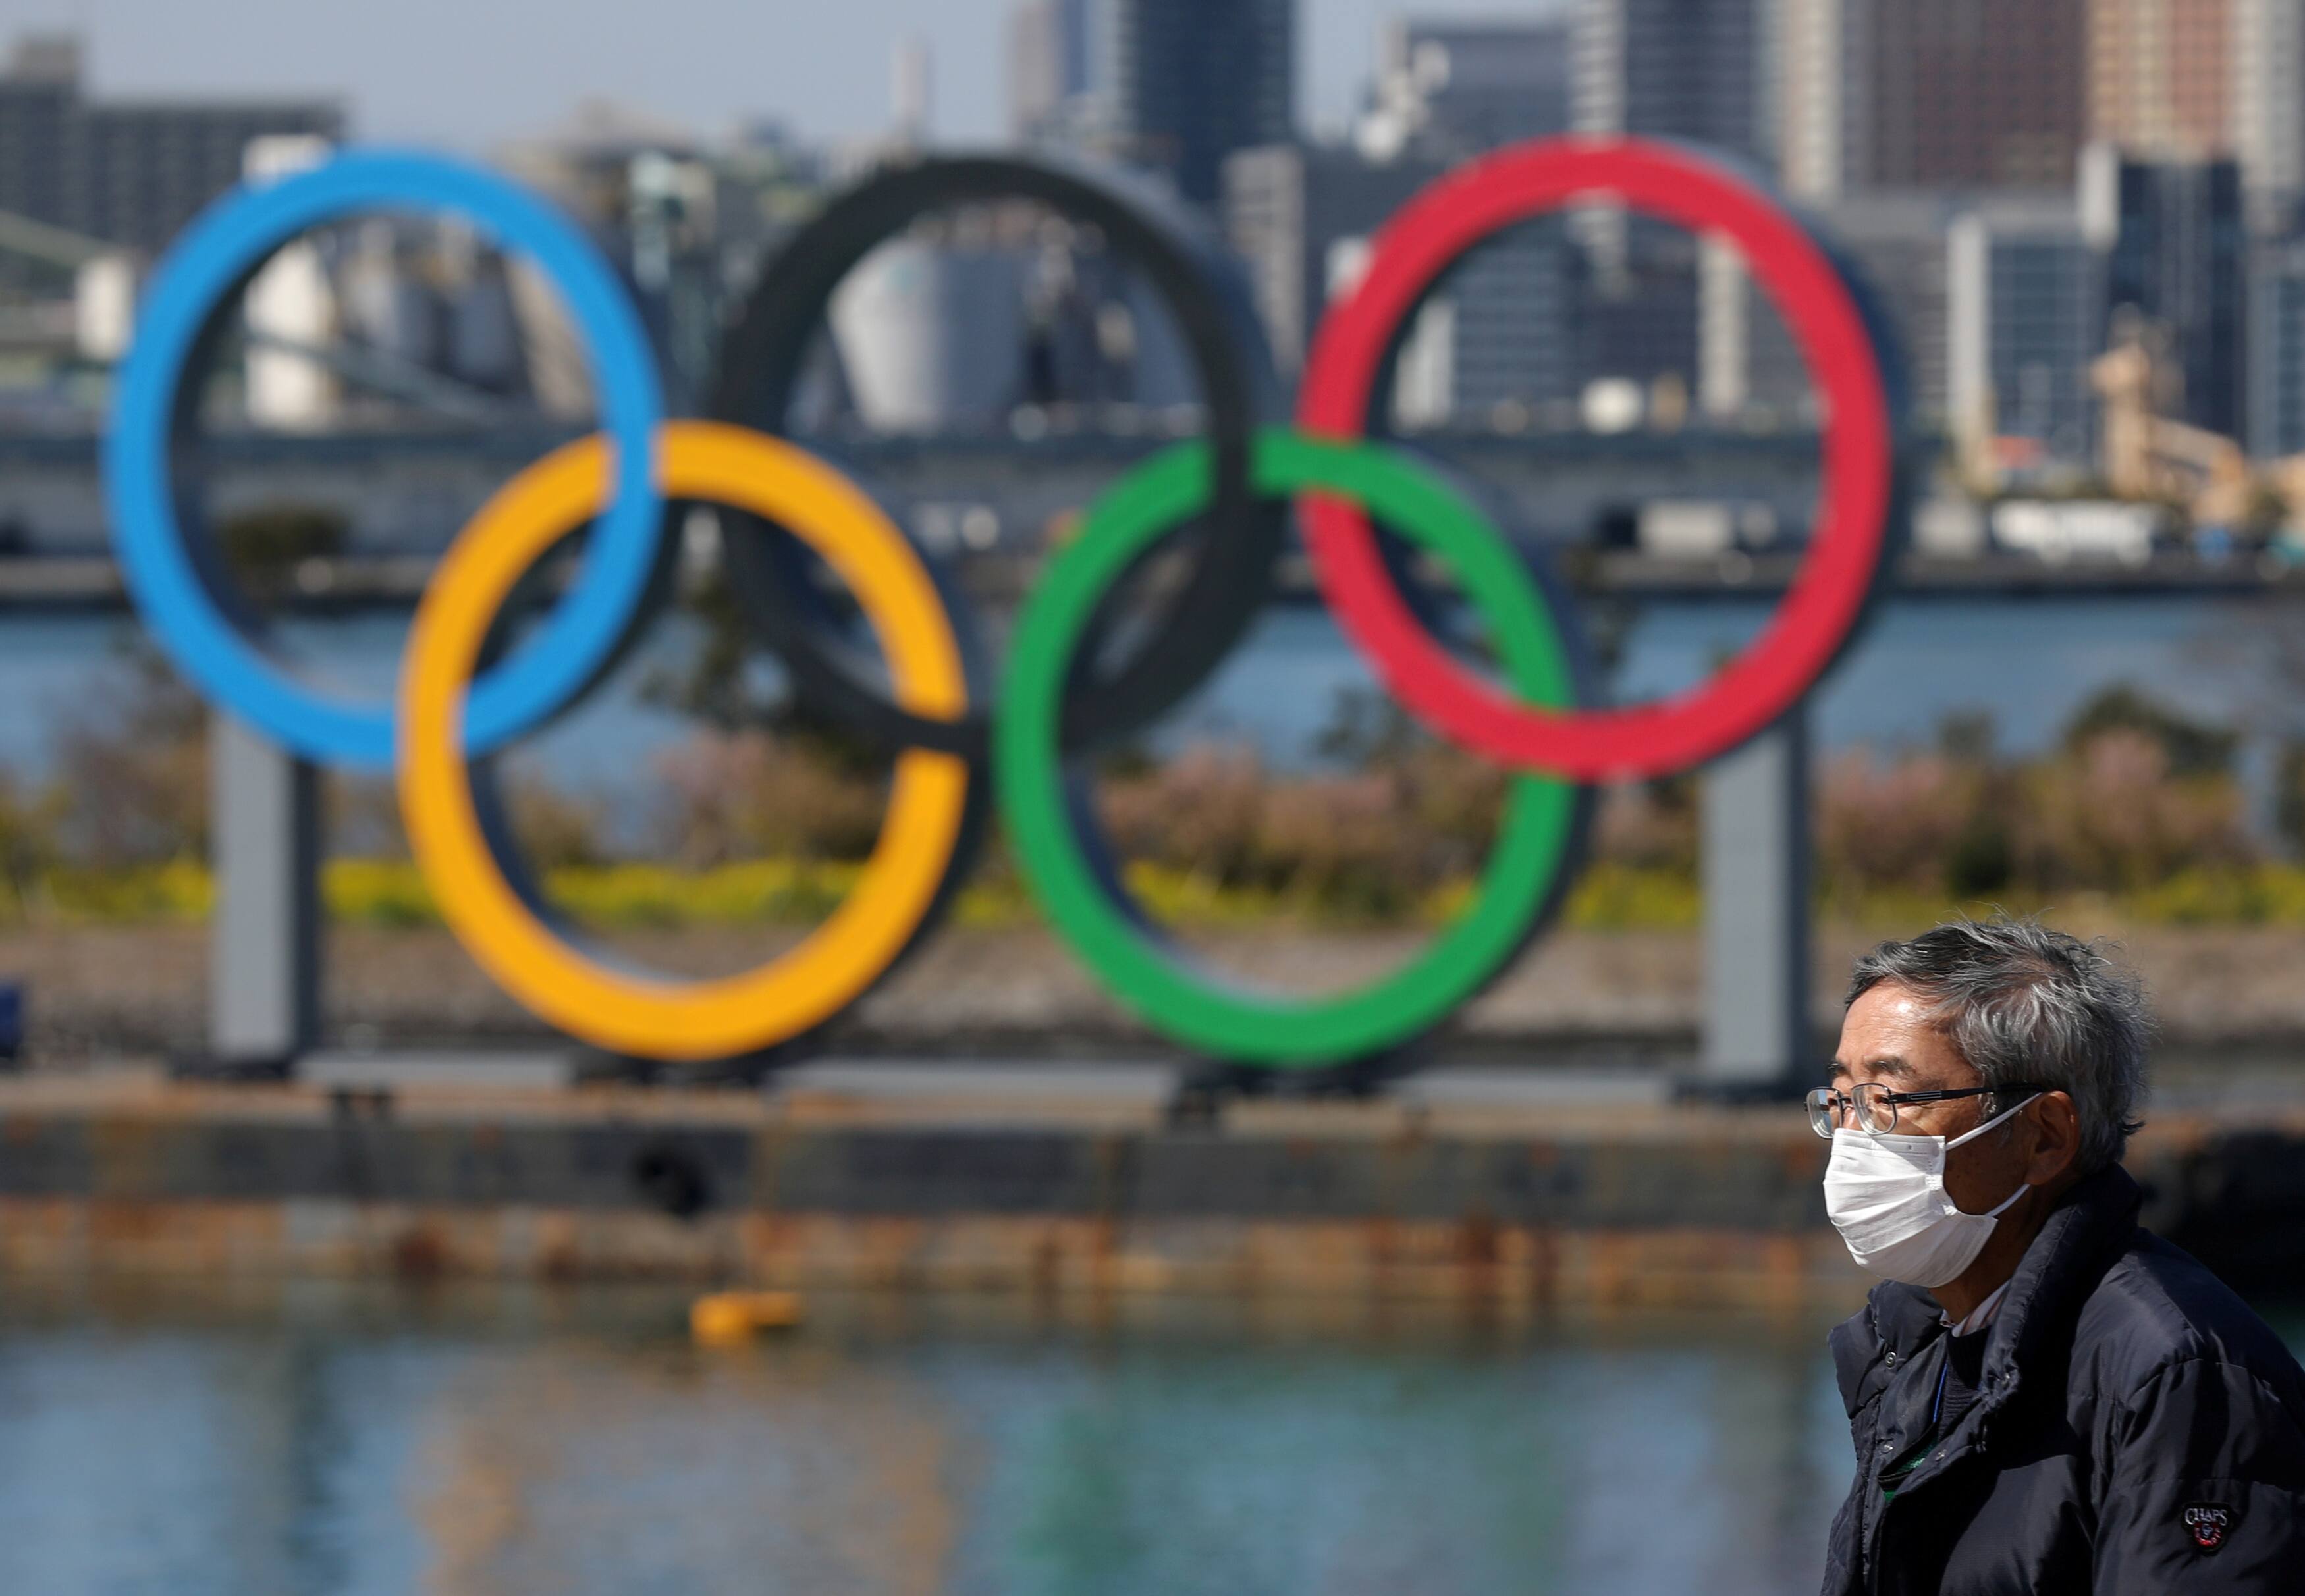 Tokyo Olympics organisers says no postponement after reports of 1-2 year delay due to coronavirus